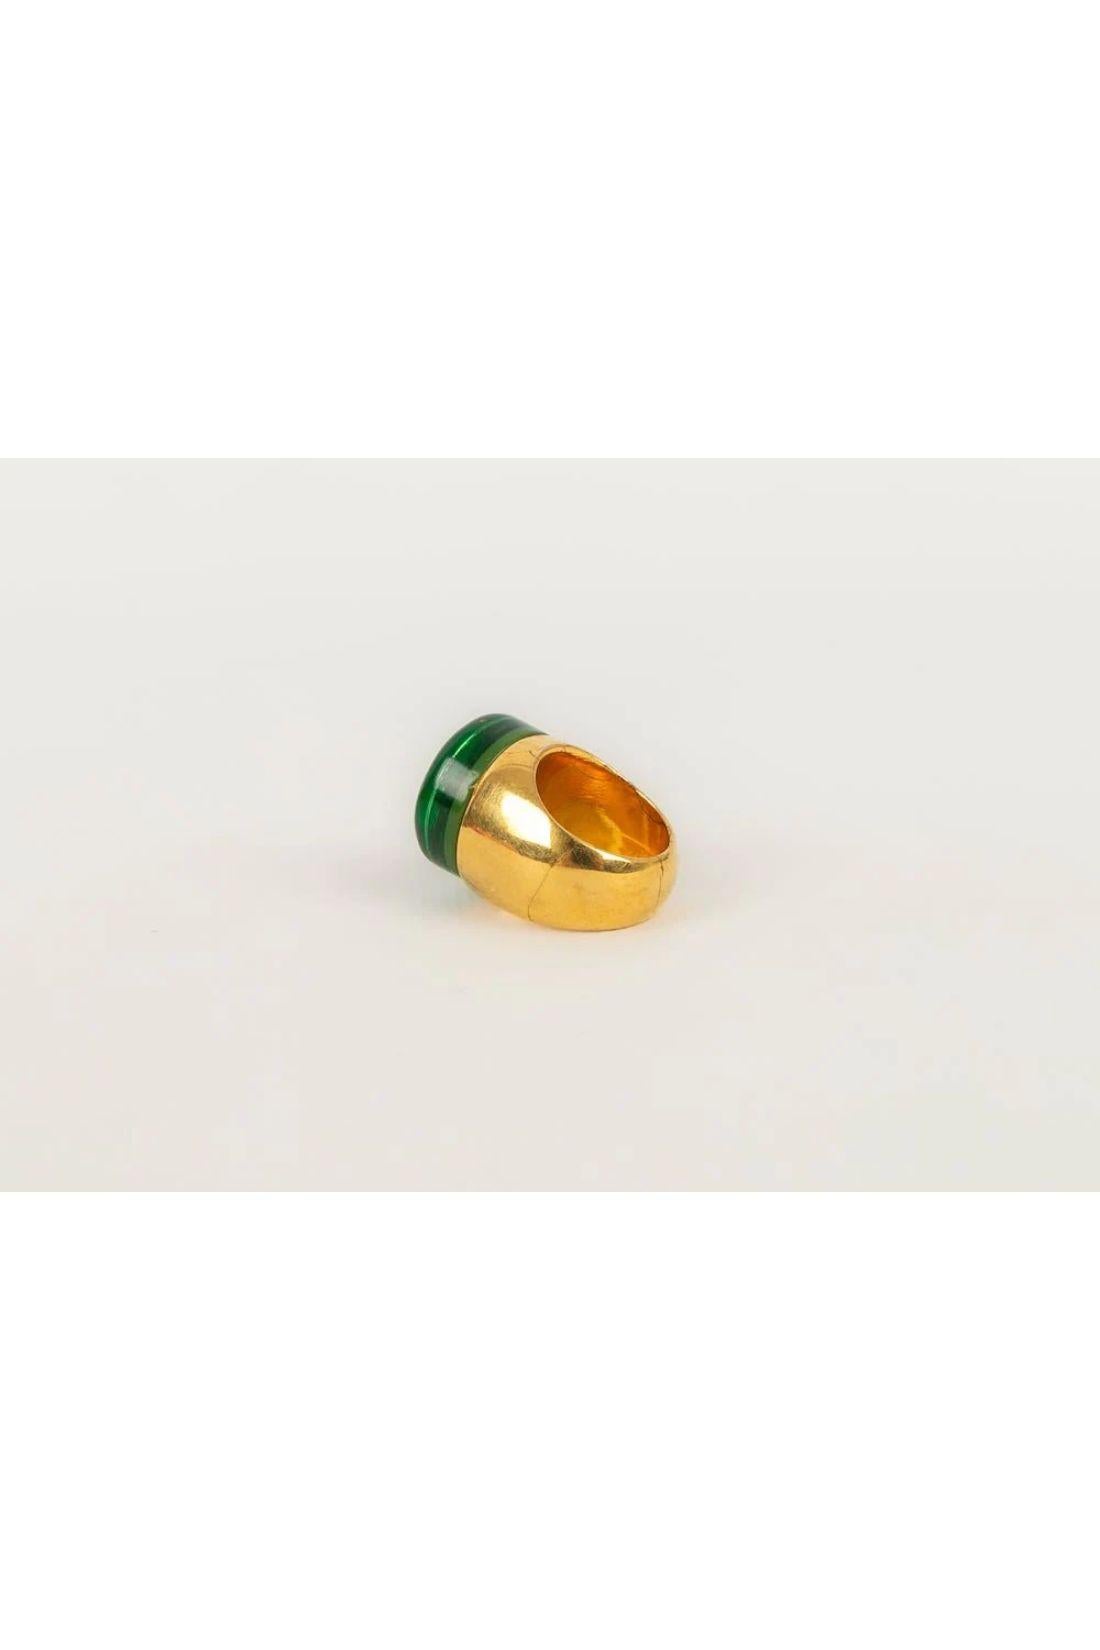 Paco Rabanne Ring in Gold Metal and Green Resin For Sale 1